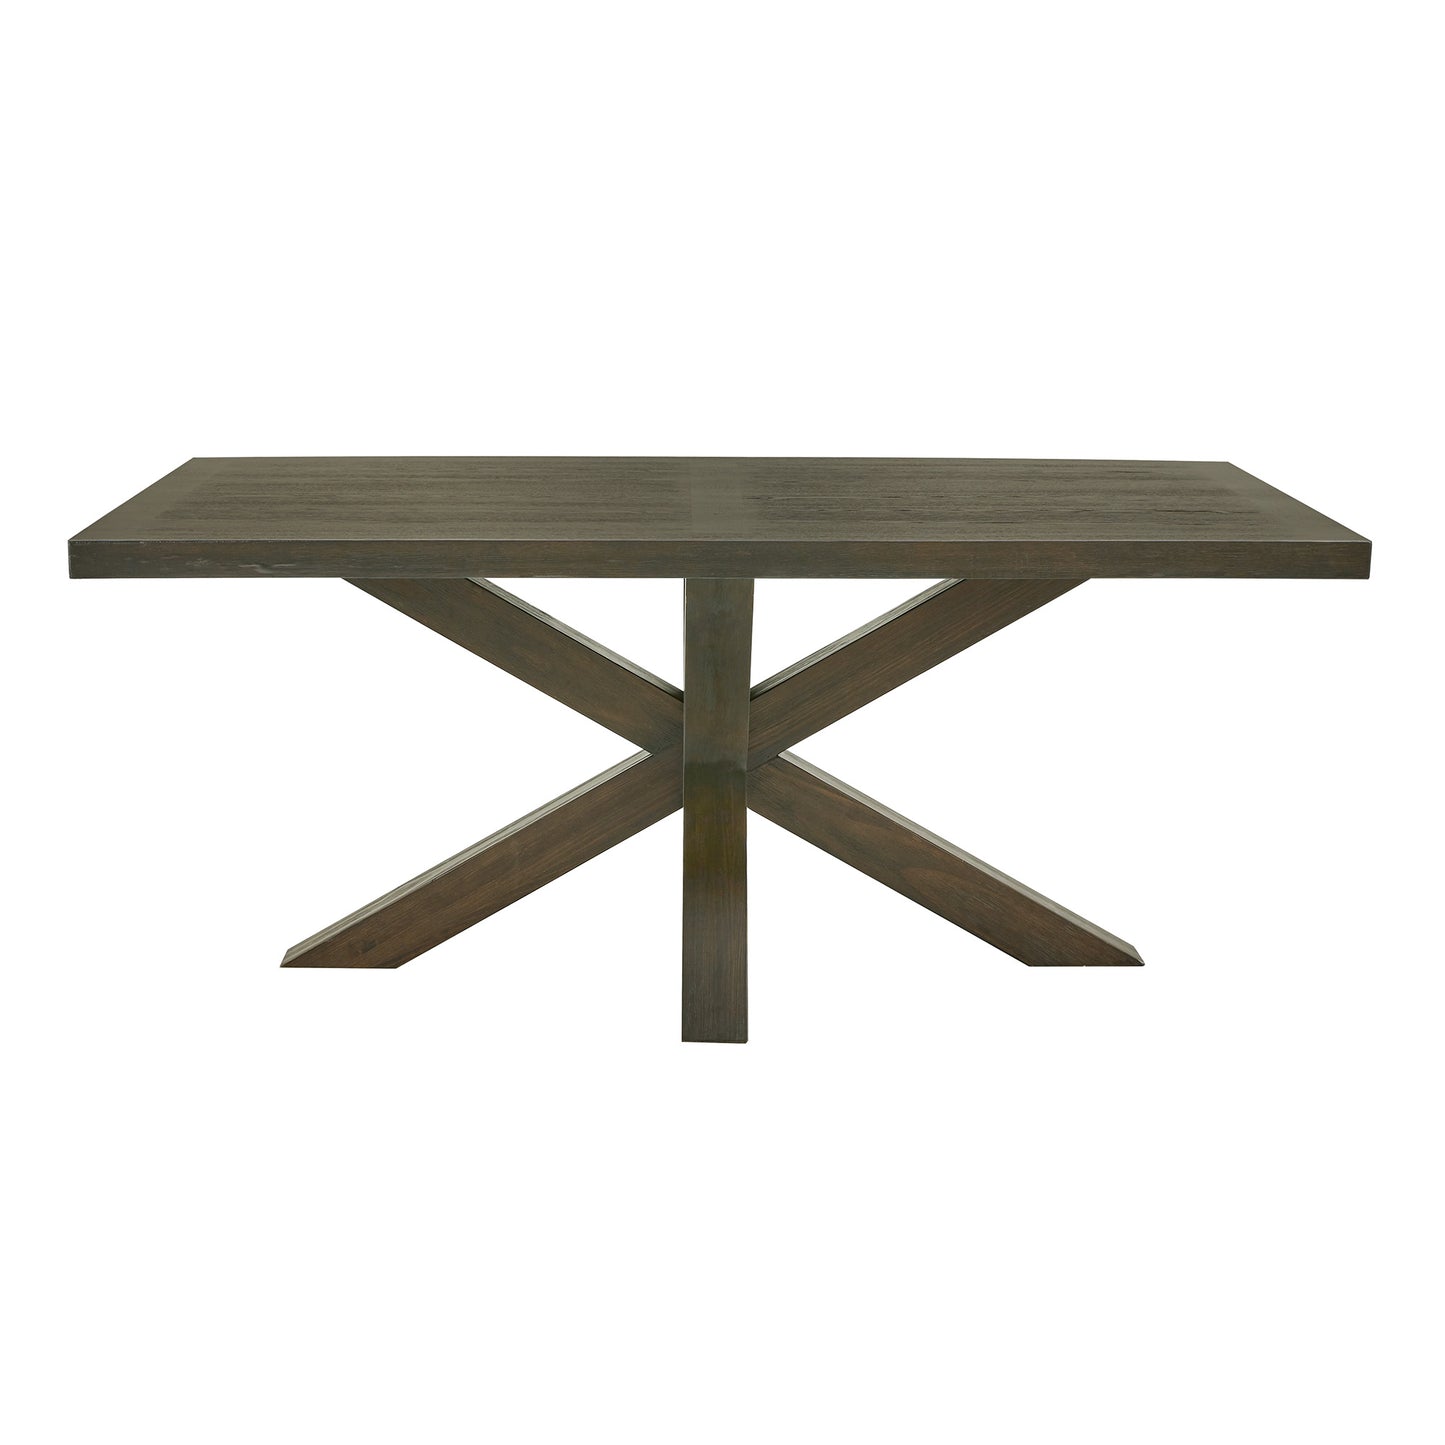 Weathered Wood Finish Table with Cross Base